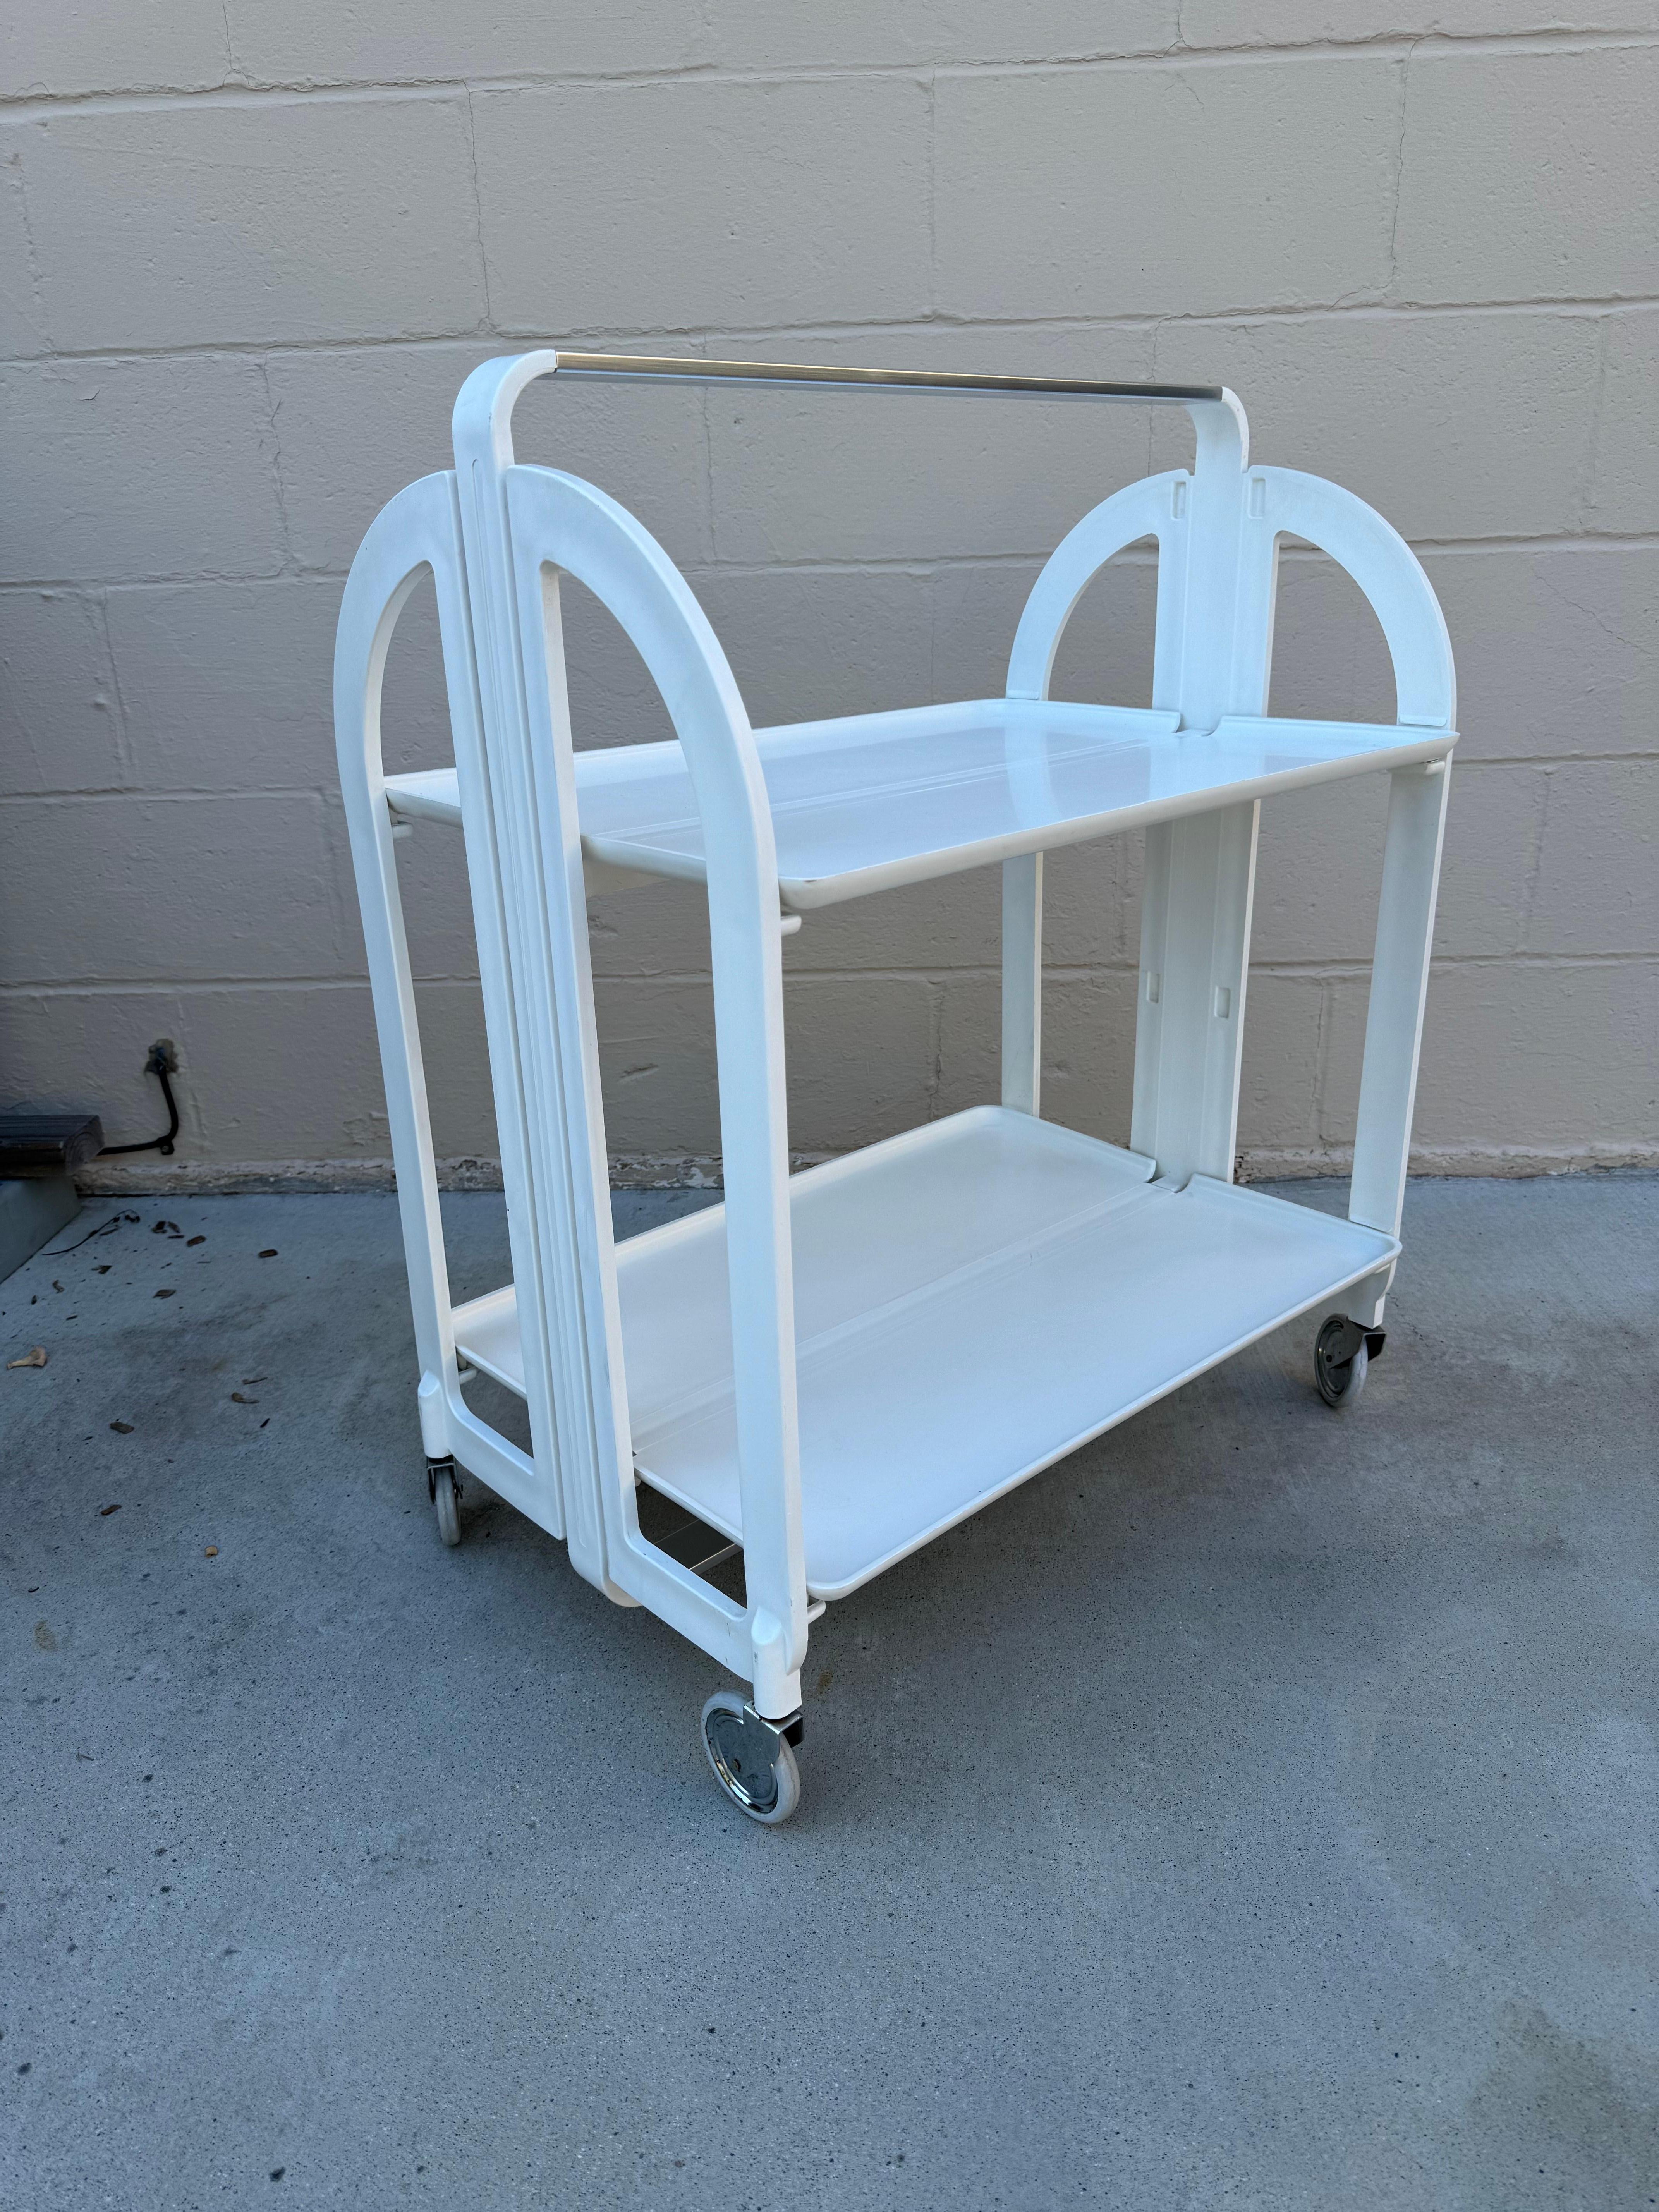 Elevate Your Space: Fratelli Guzzini Italian White Plastic Bar Cart

Are you searching for that perfect blend of functionality and style to enhance your living space? Look no further than our exquisite offering: a beautiful white, plastic bar cart